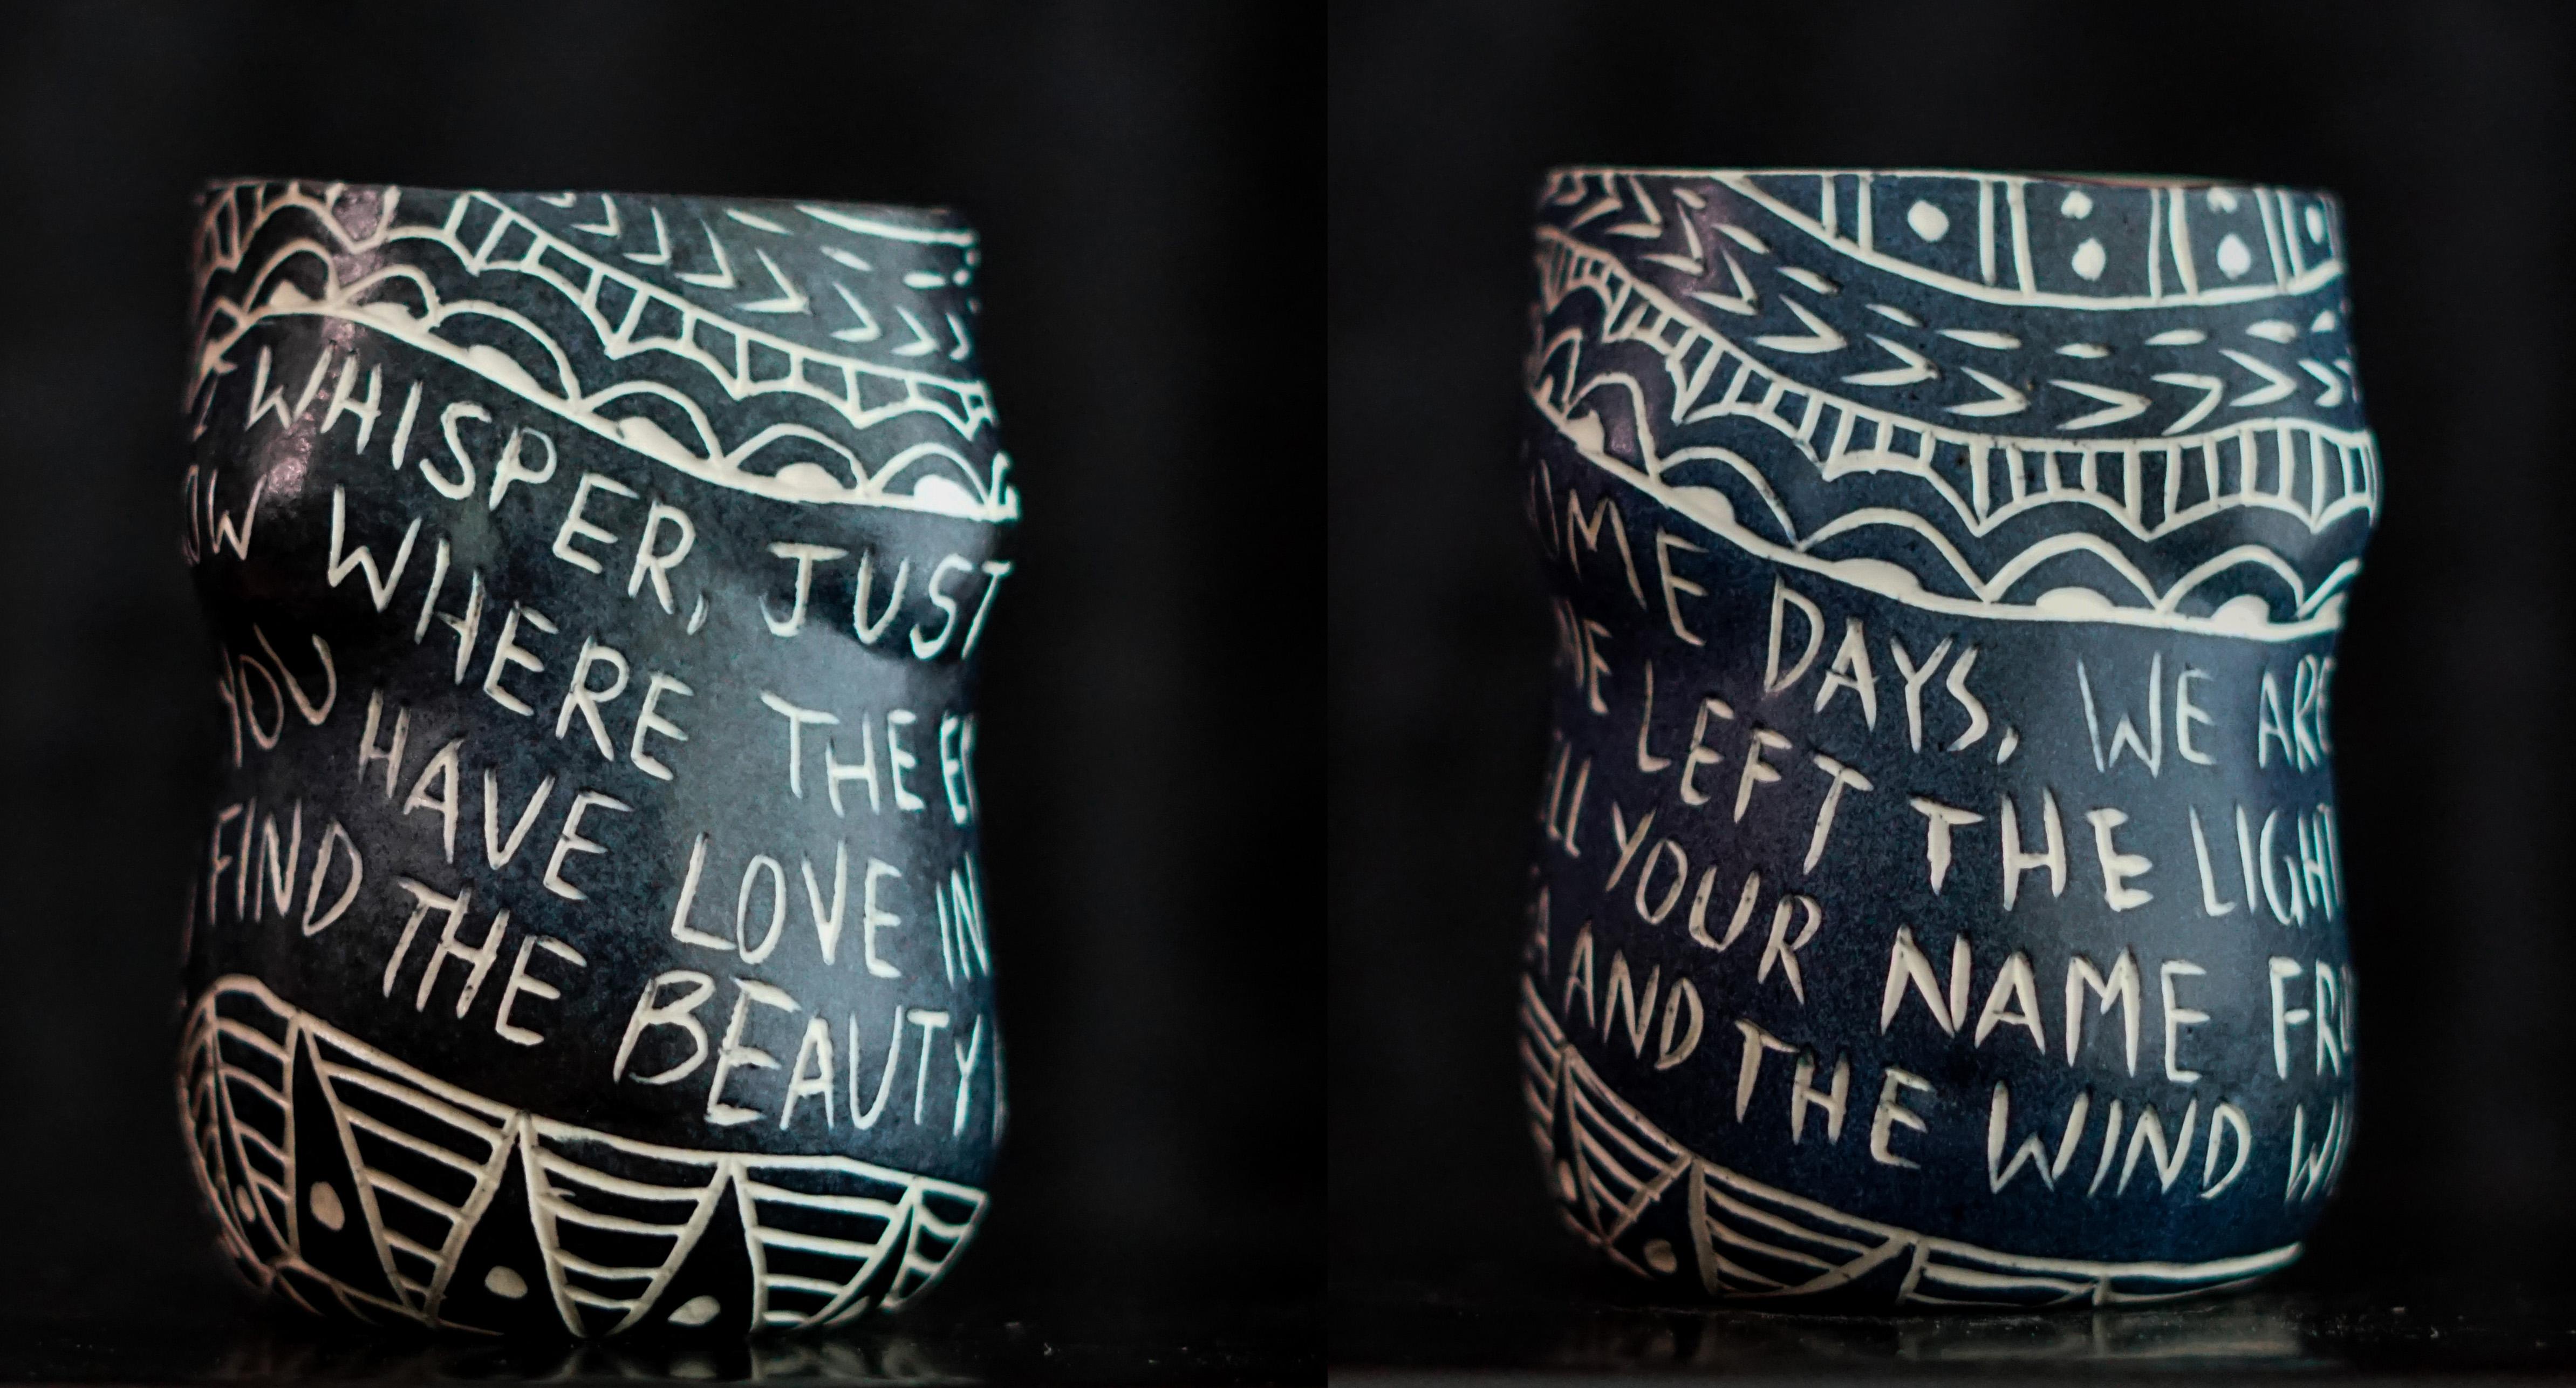 Alex Hodge Abstract Sculpture - I Whisper Just to You, and Some Days We are Both at Sea Diptych Porcelain cup 